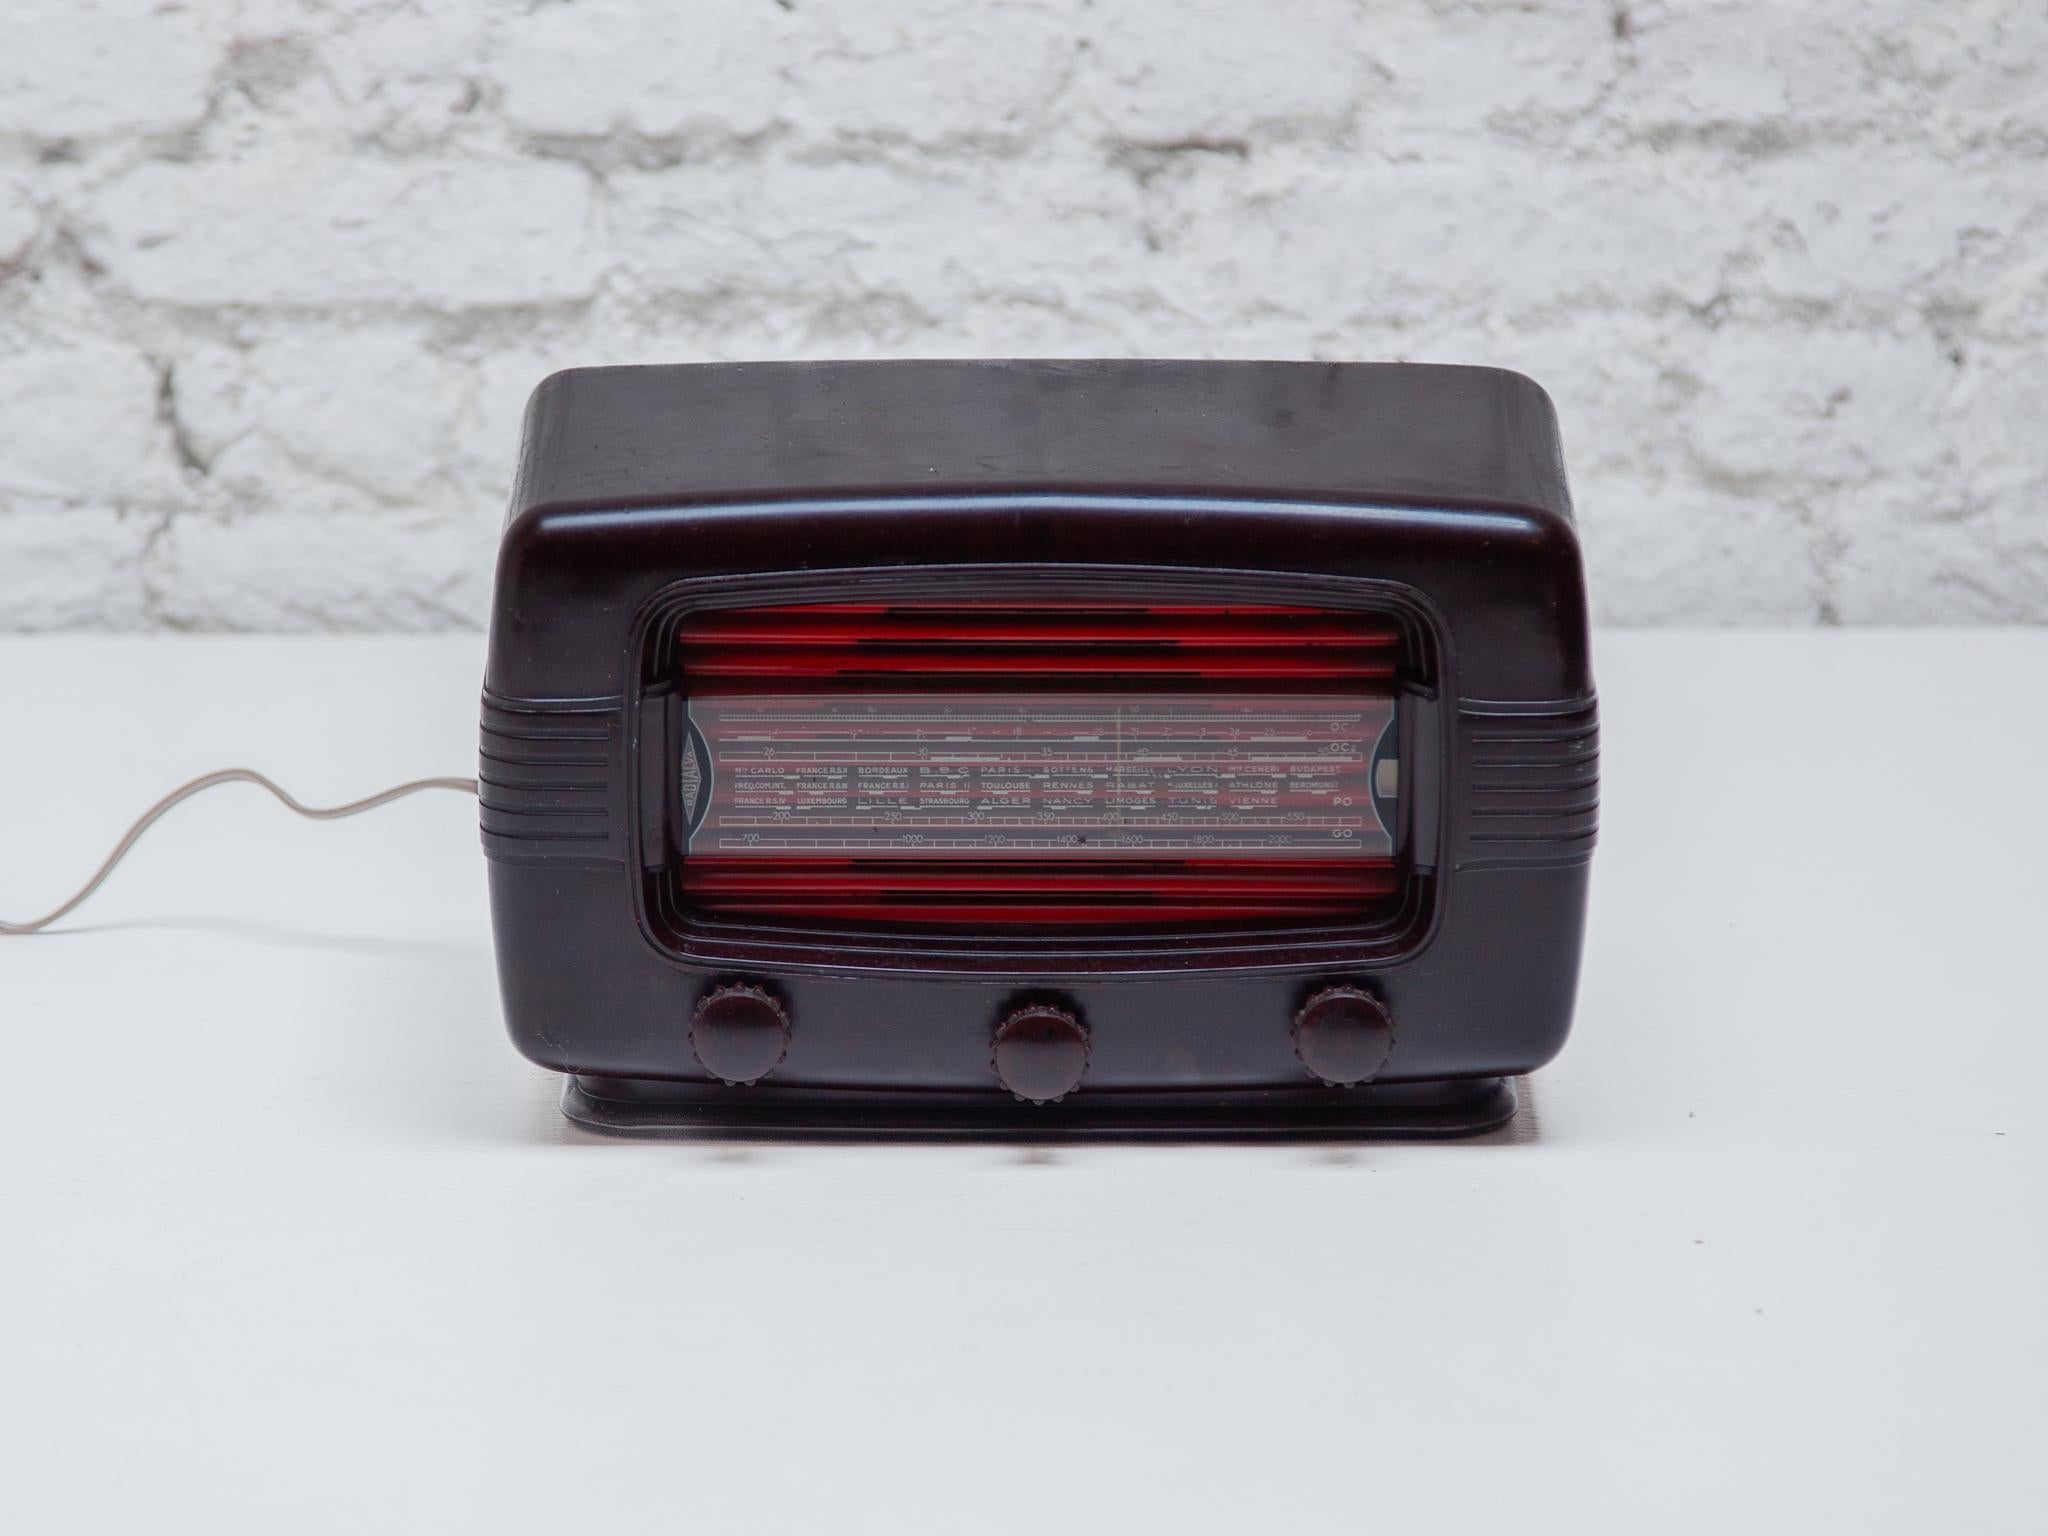 Original made of dark brown bakelite with brown knobs. Behind the glass station shell is a red and black painted metal plate that has been blackened behind the transmitter division. Two scale lights (12V/0.06A) illuminate the scale at both ends. The